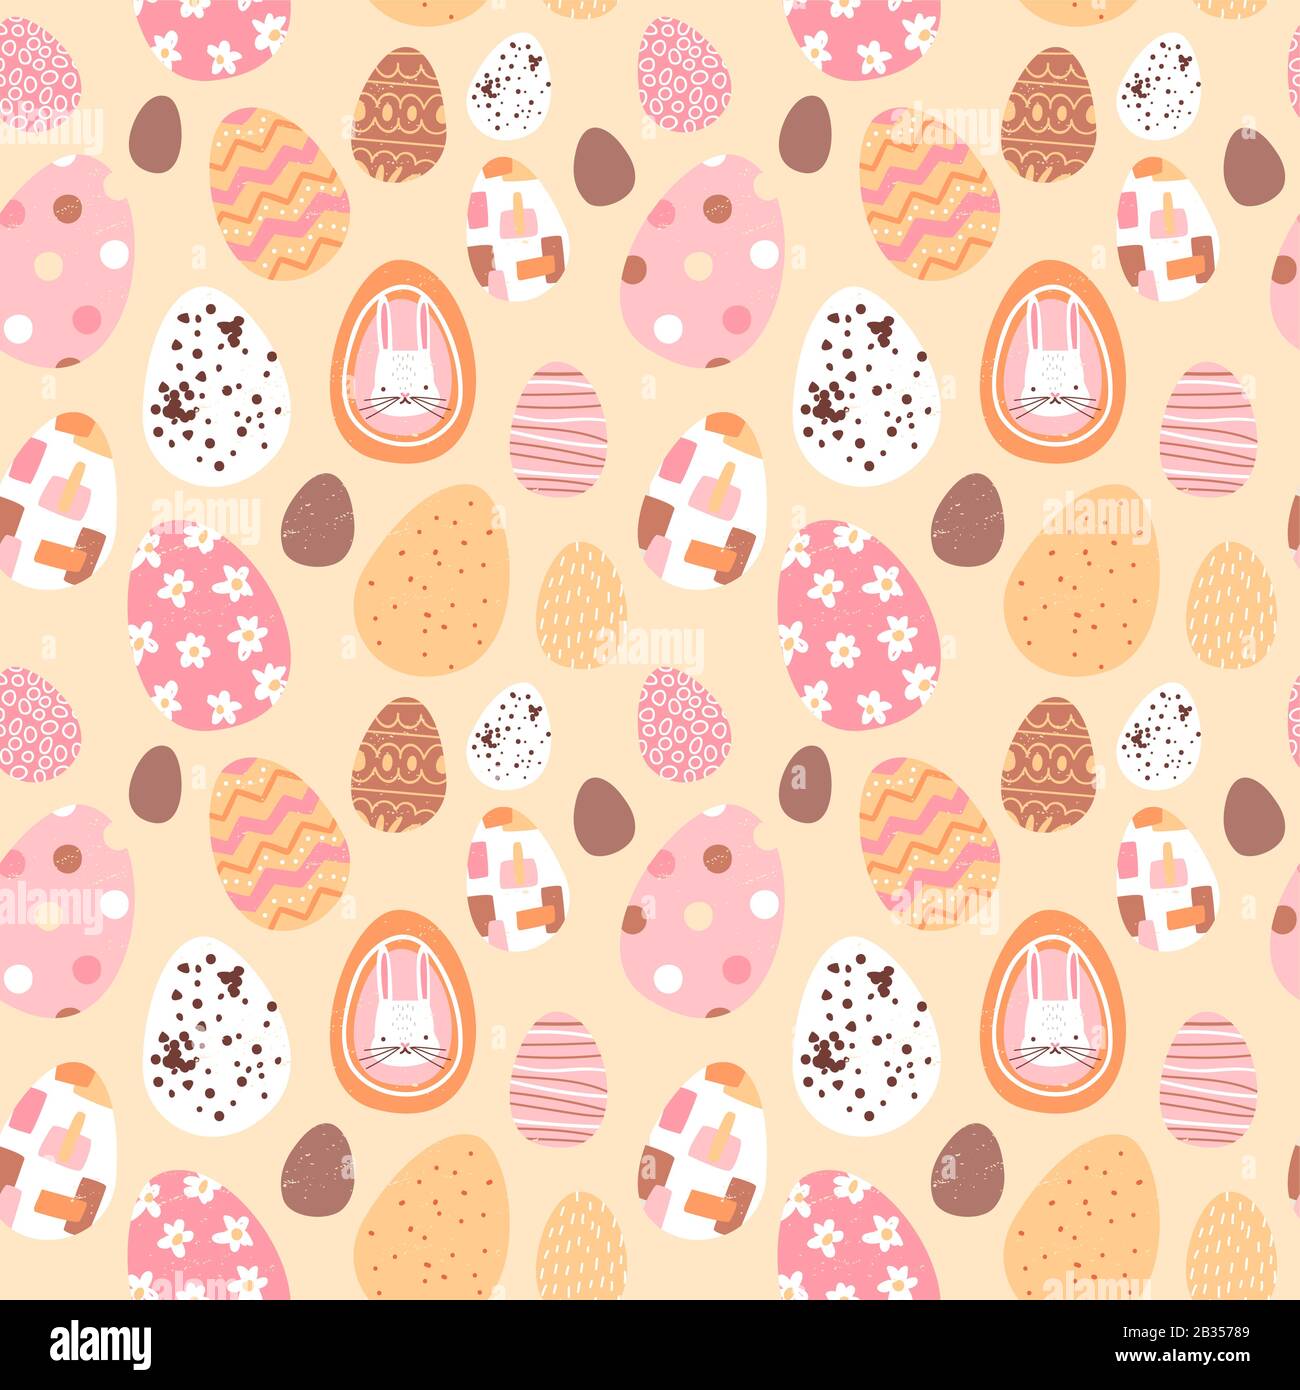 Easter egg seamless pattern with cute hand drawn rabbit, farm eggs and spring decoration. Festive holiday background for traditional event. Stock Vector